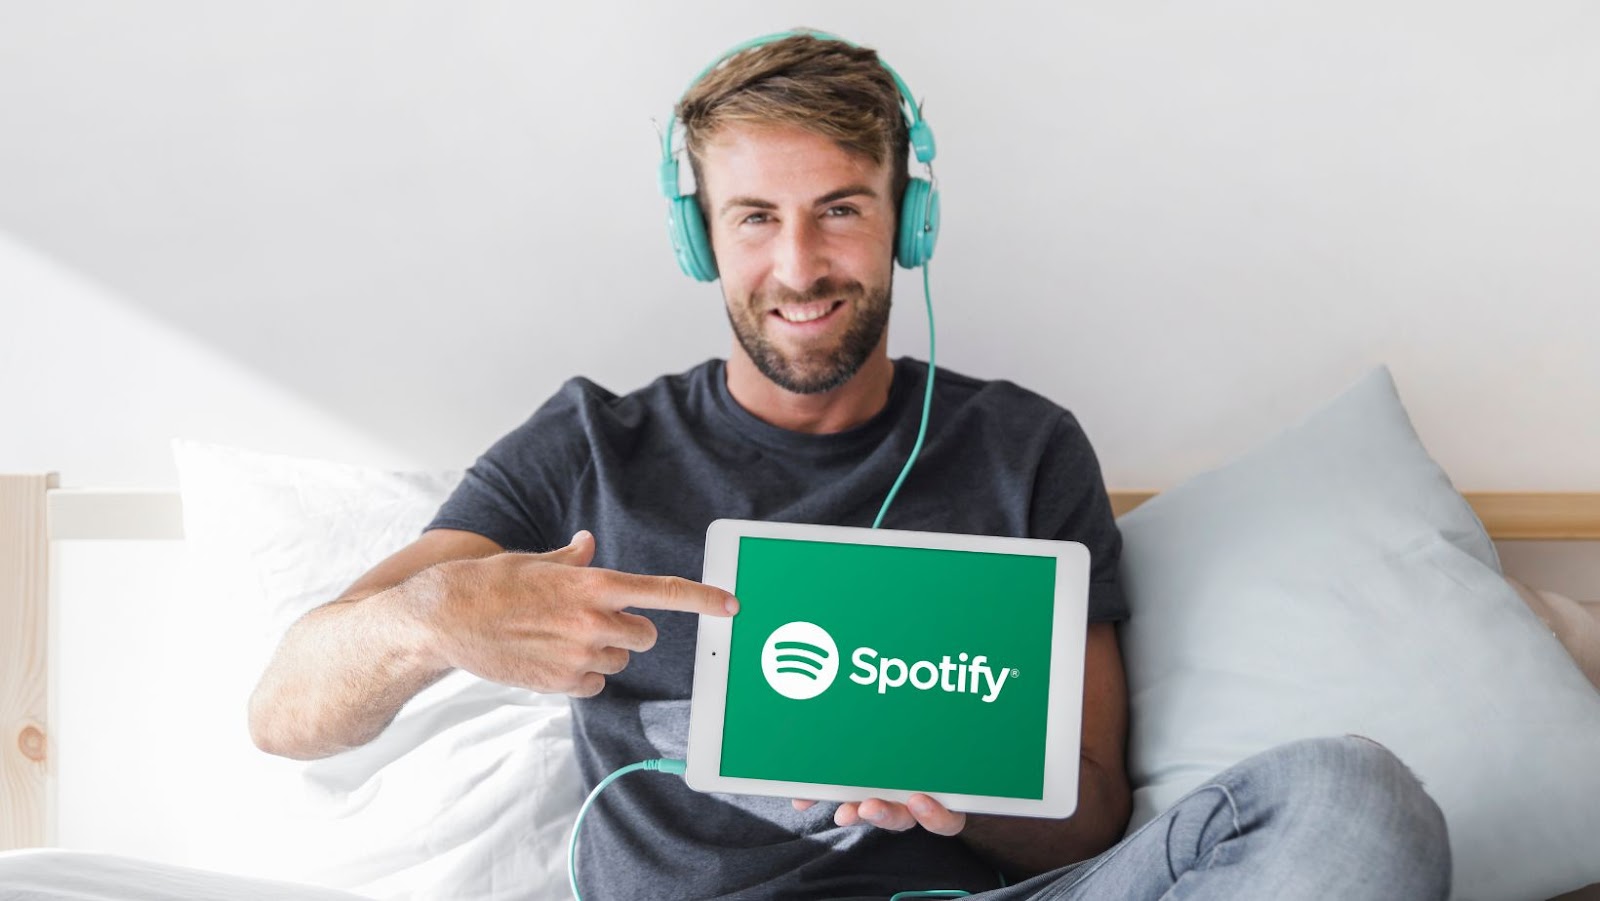 Why Spotify is Targeting YouTube